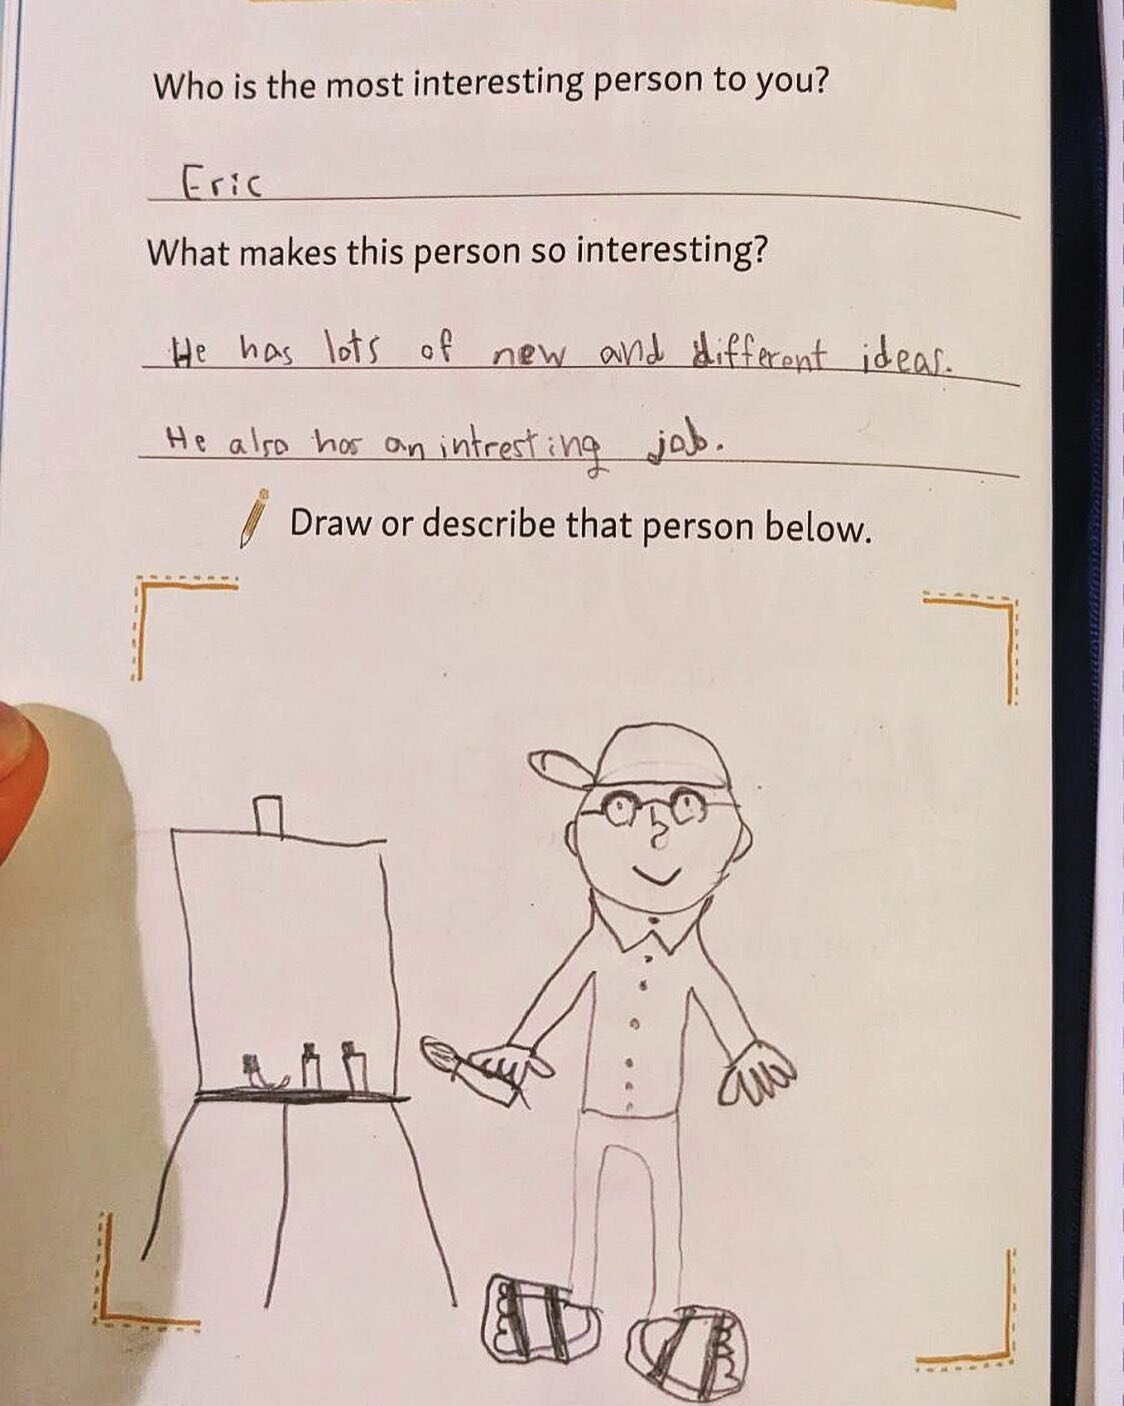 The feeling is mutual little friend who made this. 

Q: Who is the most interesting person to you?
A: Eric

Q: What makes this person so interesting?
A: He has lots of new and different ideas. He also has an interesting job. 

Also, the drawing of my